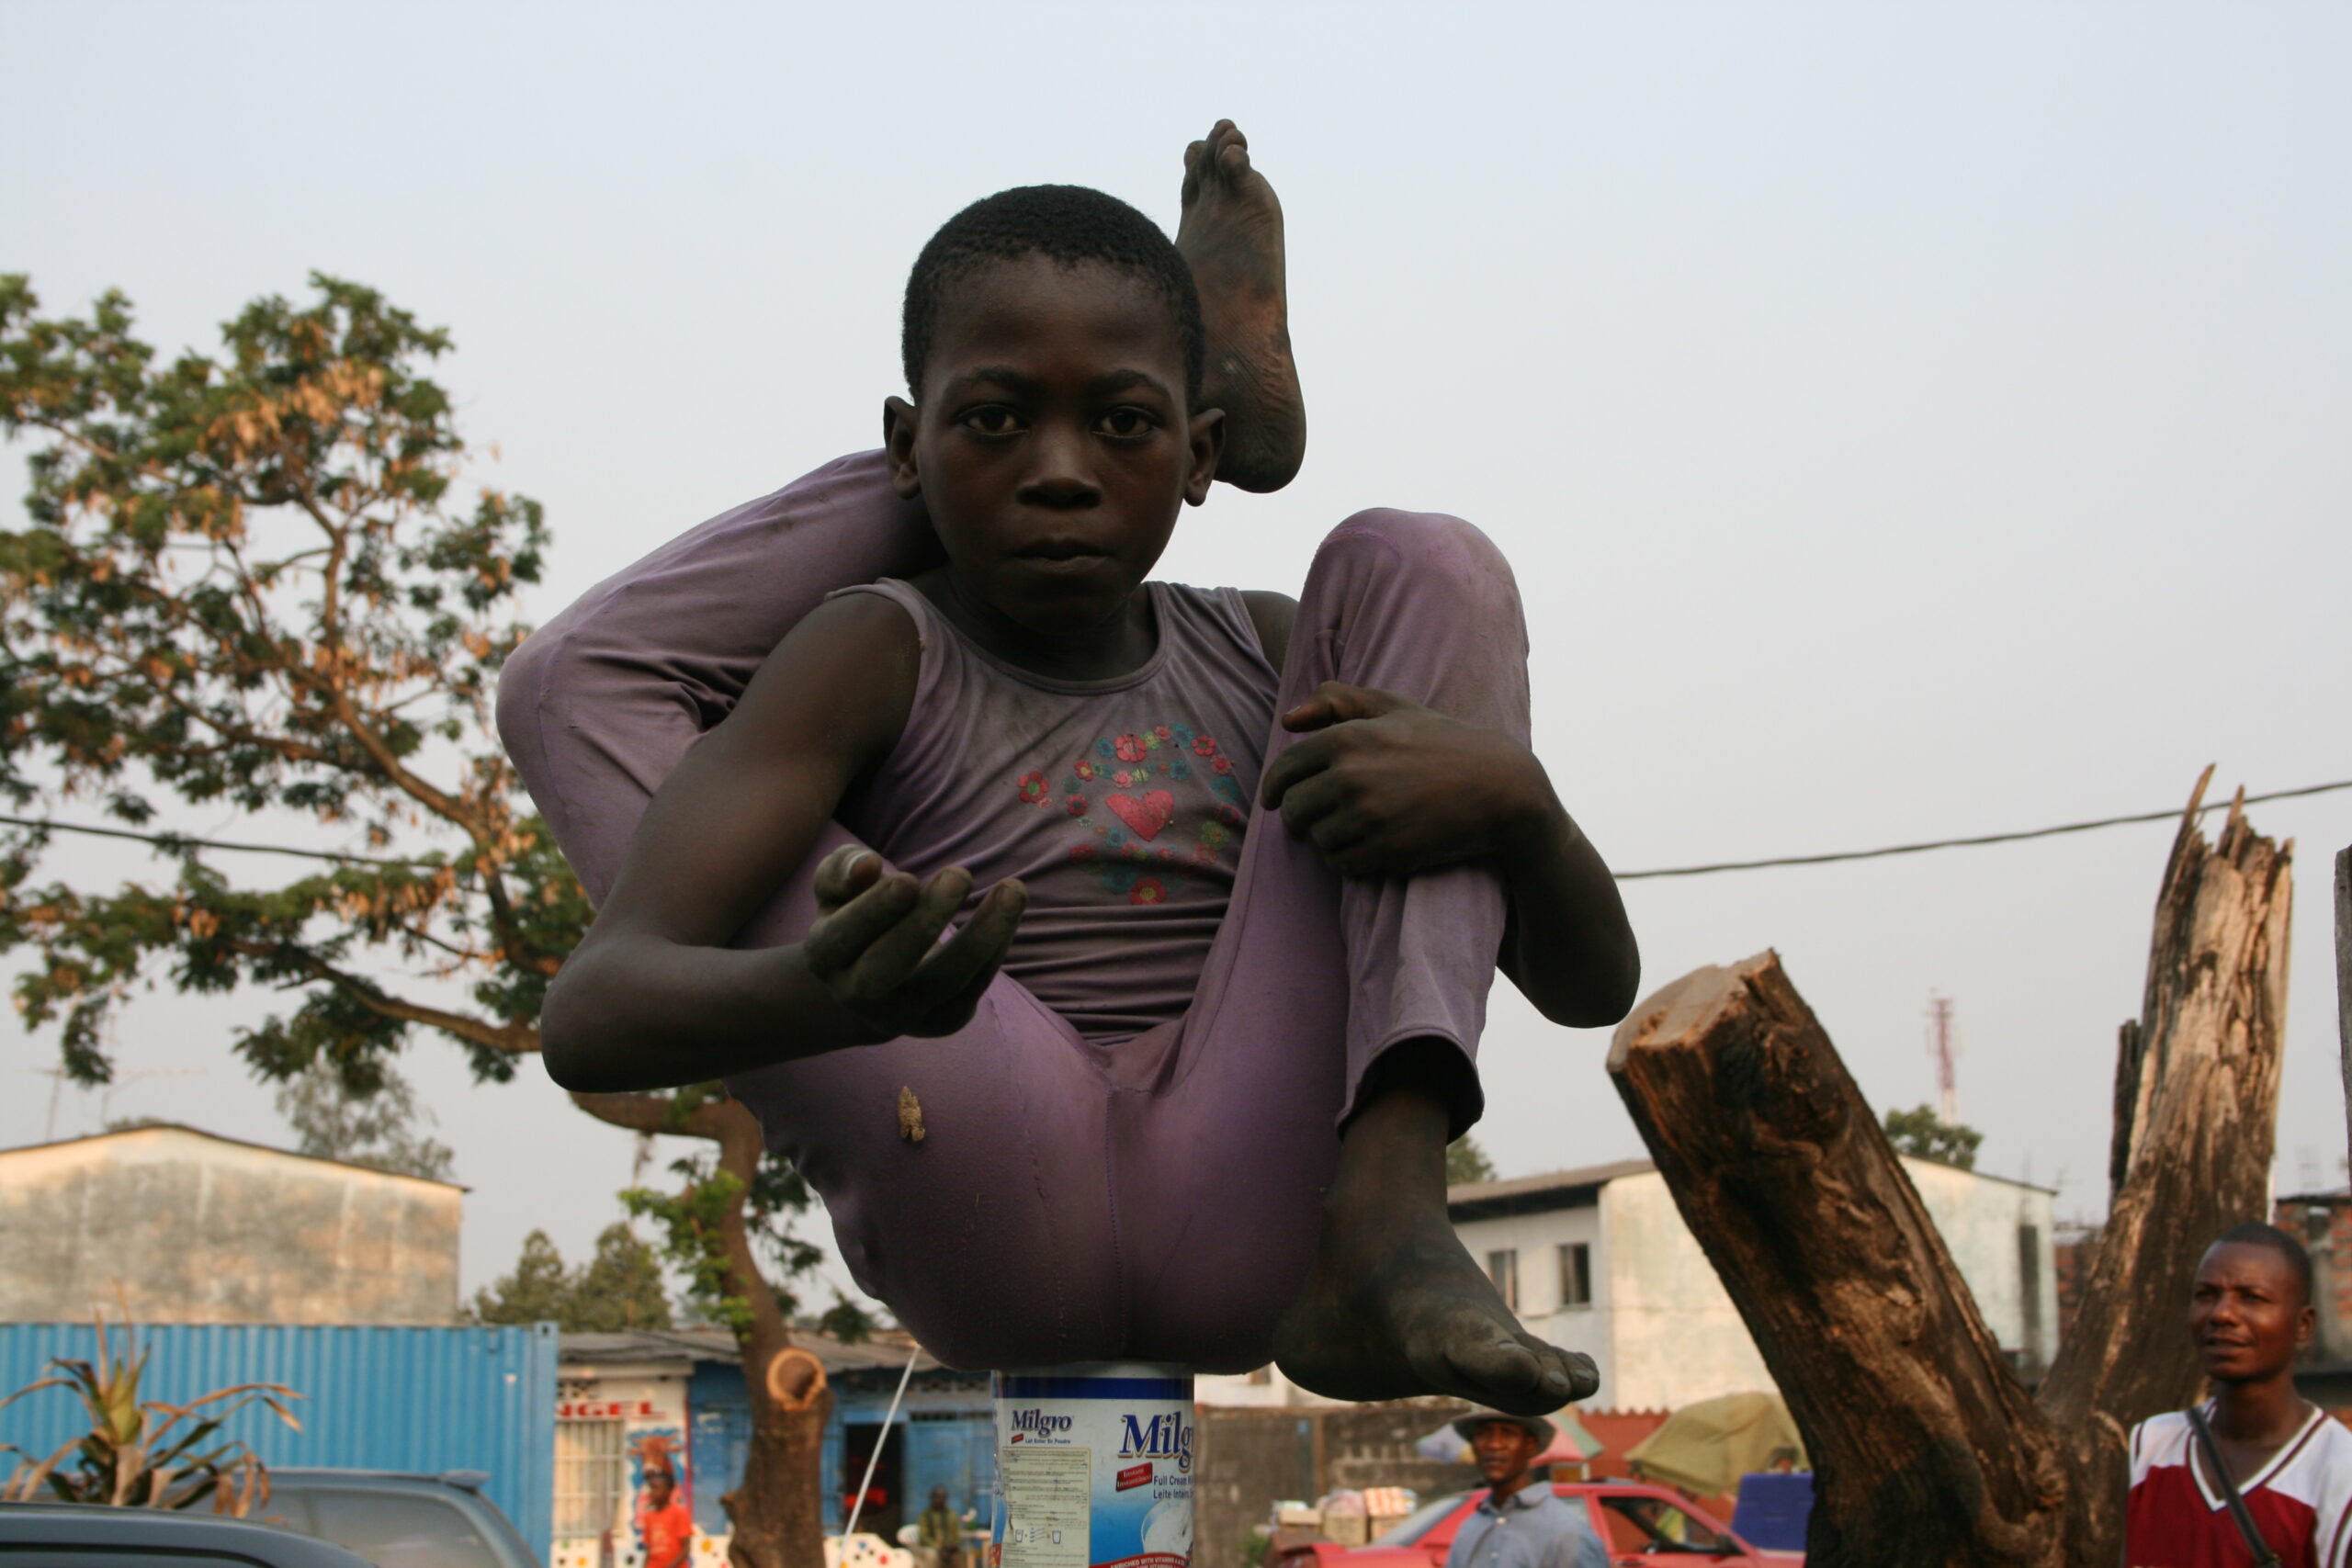 Child performing circus act asking for money